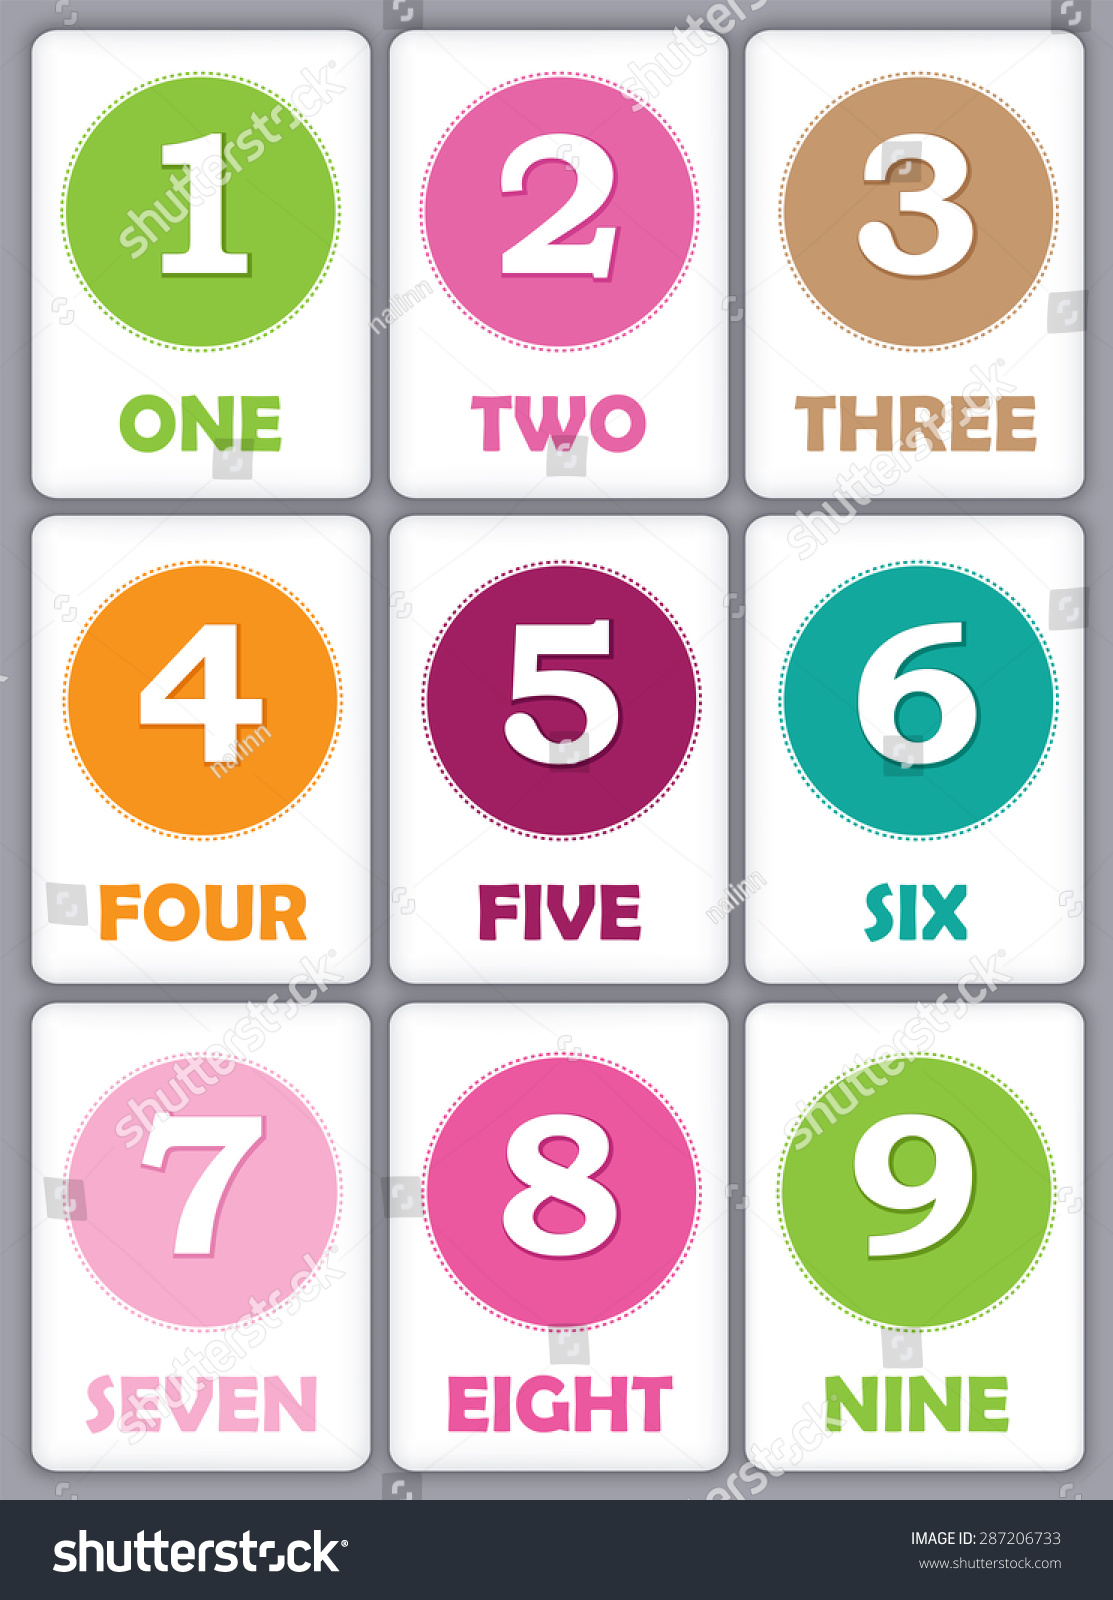 Printable Flash Card Collection For Numbers And Their ...